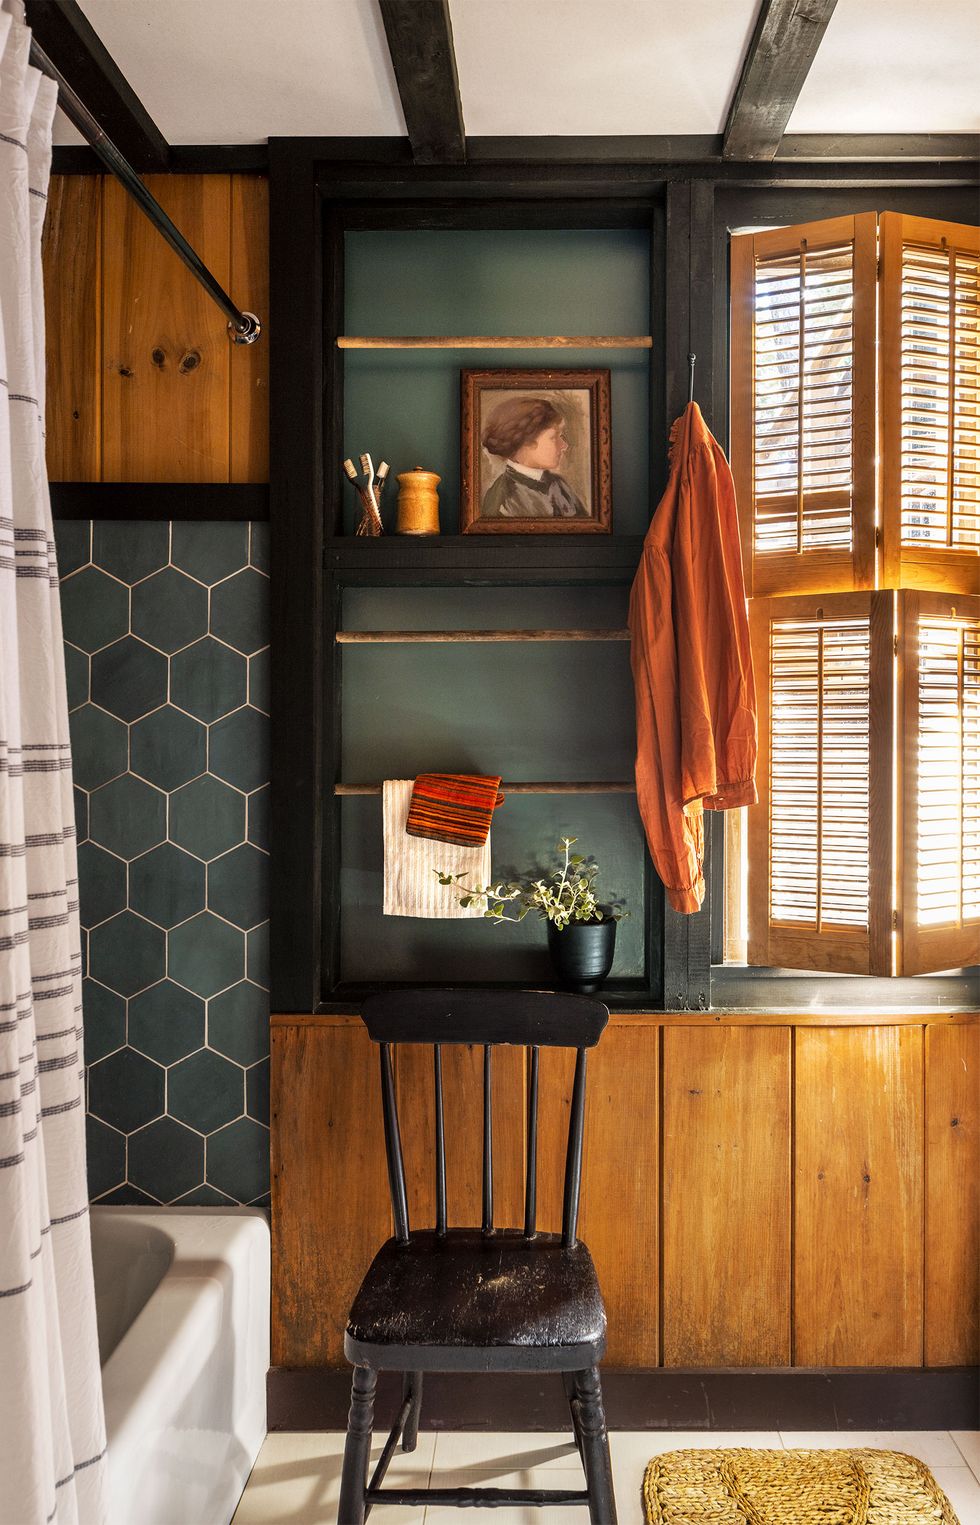 a primary bathroom has dark teal colored hexagonal tiles around the bathtub, a worn black wood chair, wood lower cabinets, a set of inset dowels for towels, a window with wood shutters, and a sisal rug